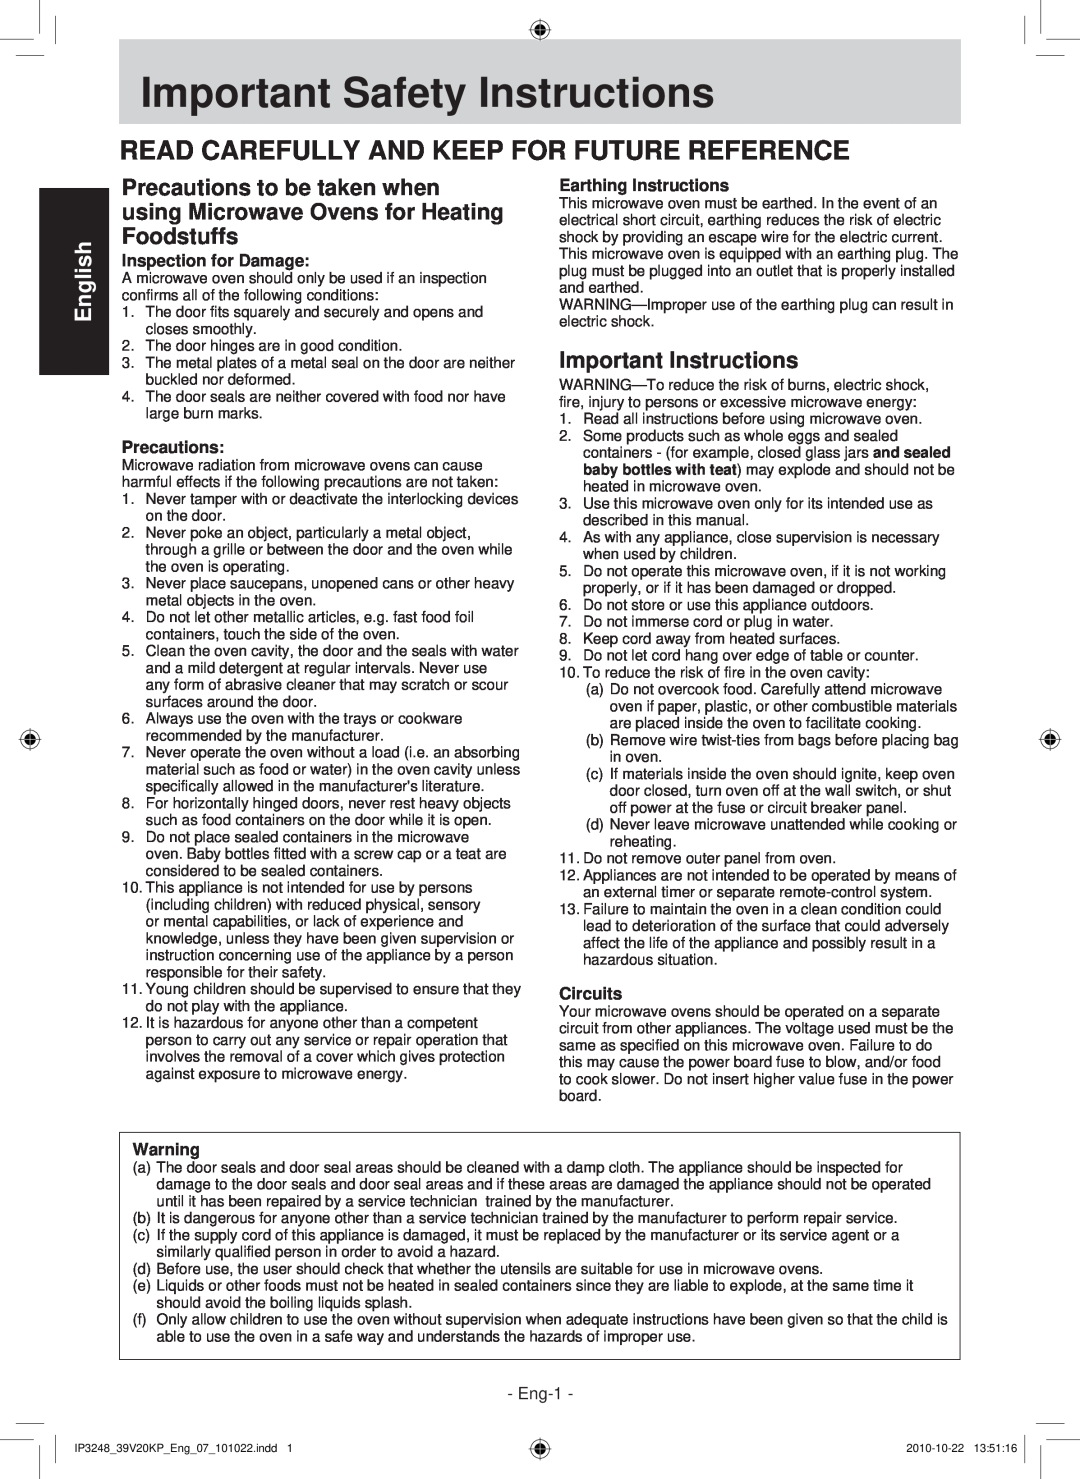 Panasonic NN-ST340W Important Safety Instructions, Read Carefully And Keep For Future Reference, English, Precautions 